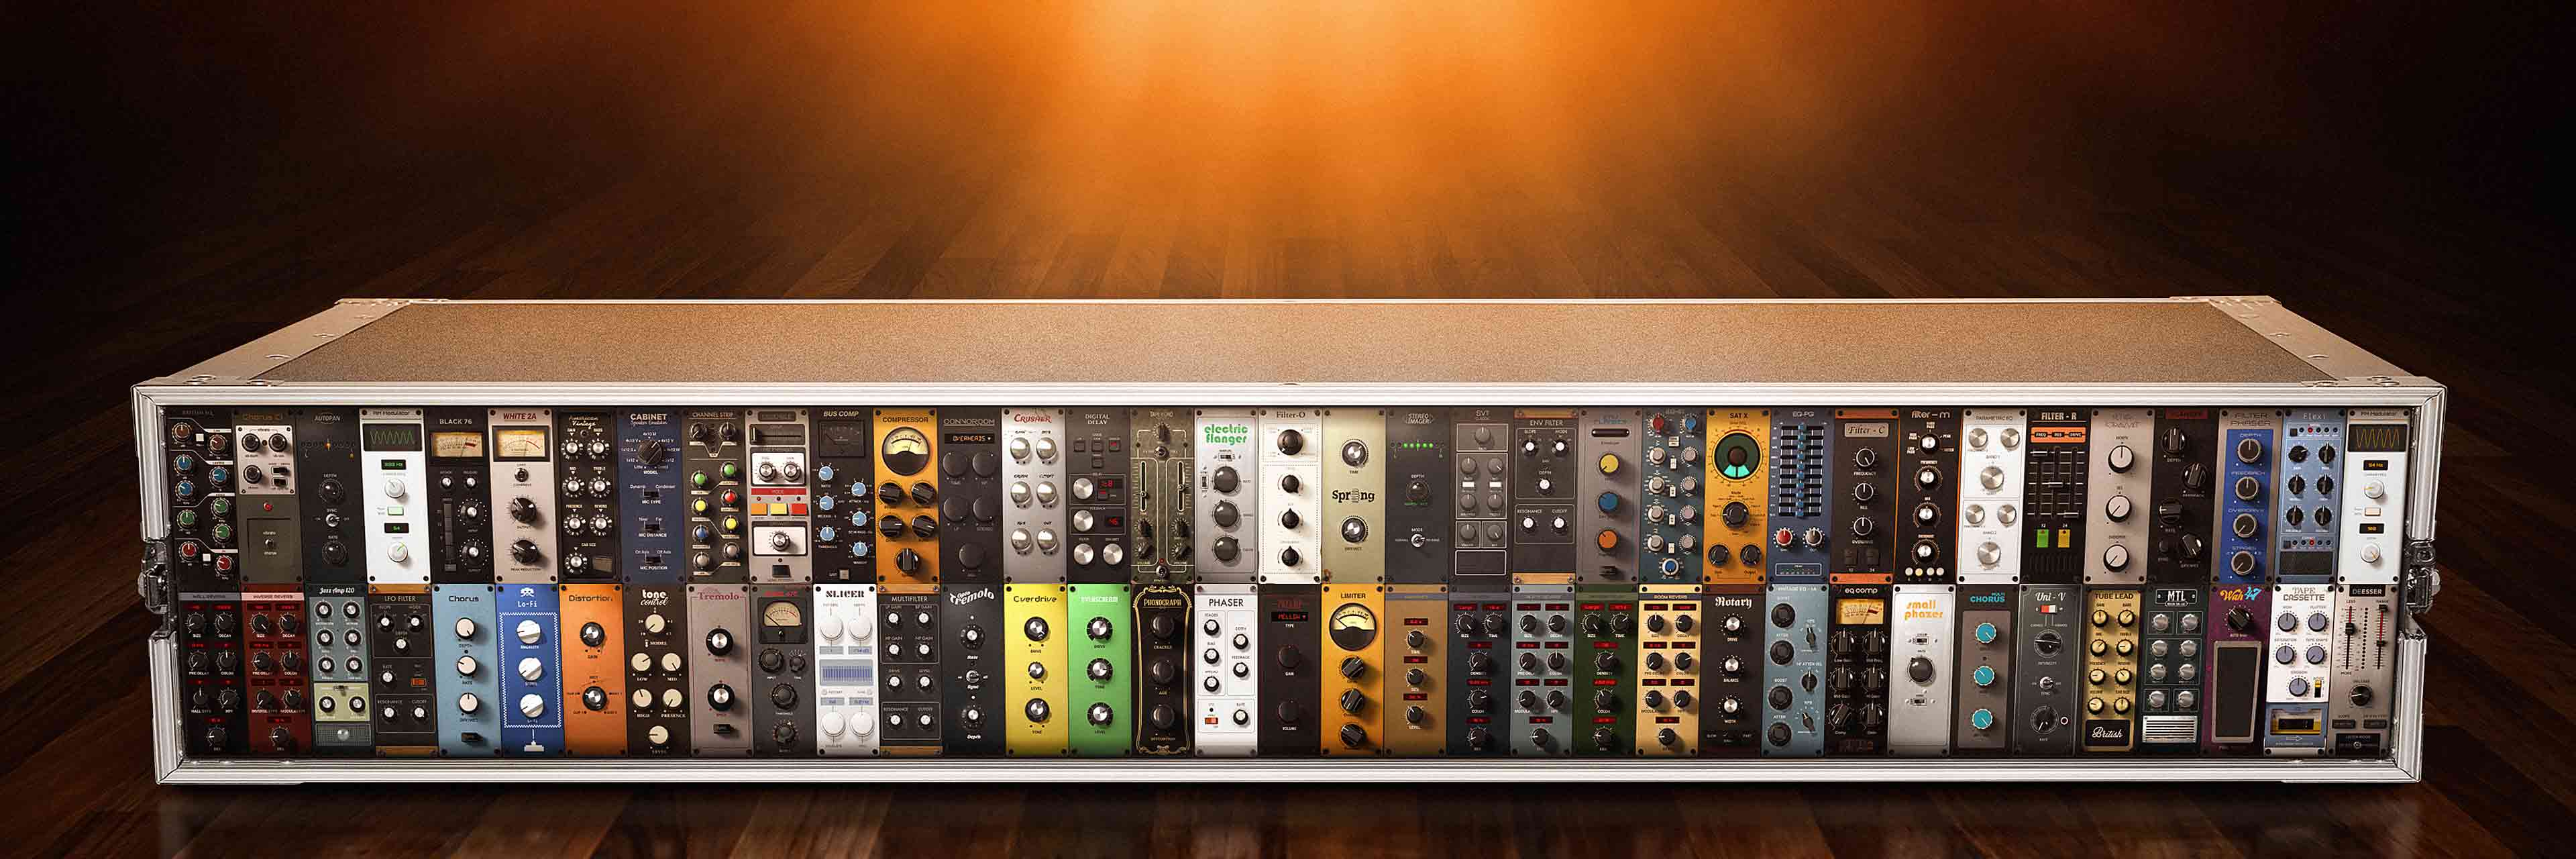 Mixbox Audio Effects Rack. All The Fx You Need In One Rack.